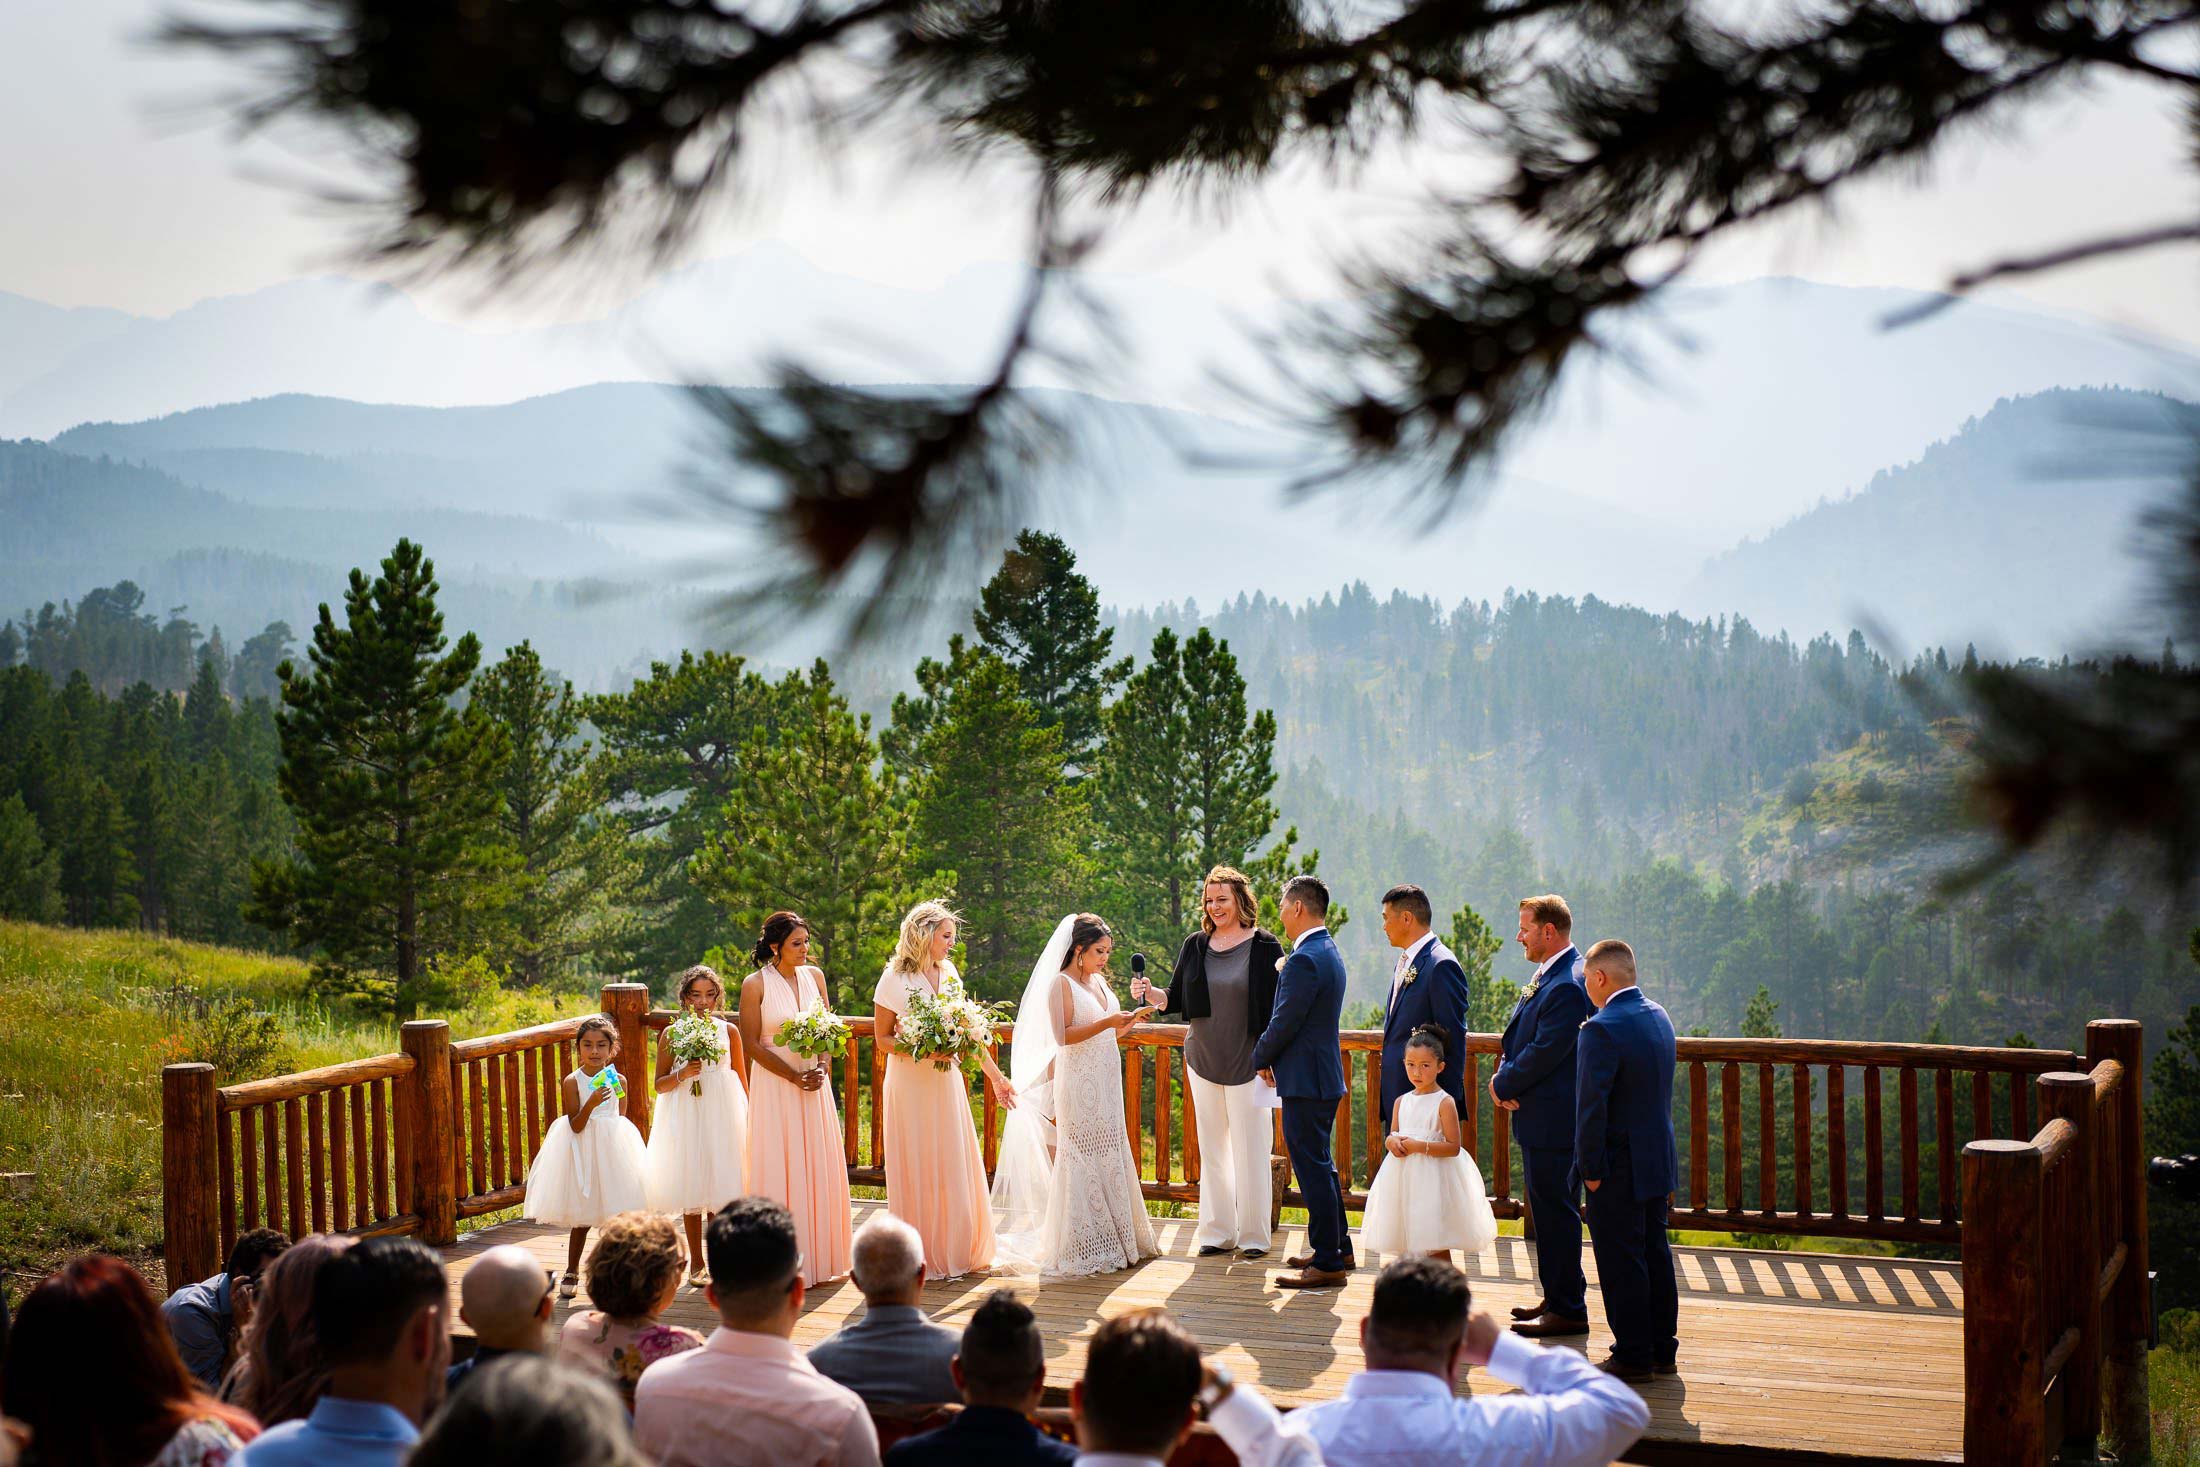 Bride reads her wedding vows during their wedding ceremony in the mountains as their wedding party stands by their side, wedding photos, wedding photography, wedding photographer, wedding inspiration, wedding photo inspiration, mountain wedding, YMCA of the Rockies wedding, YMCA of the Rockies wedding photos, YMCA of the Rockies wedding photography, YMCA of the Rockies wedding photographer, YMCA of the Rockies wedding inspiration, YMCA of the Rockies wedding venue, Estes Park wedding, Estes Park wedding photos, Estes Park wedding photography, Estes Park wedding photographer, Colorado wedding, Colorado wedding photos, Colorado wedding photography, Colorado wedding photographer, Colorado mountain wedding, Colorado wedding inspiration